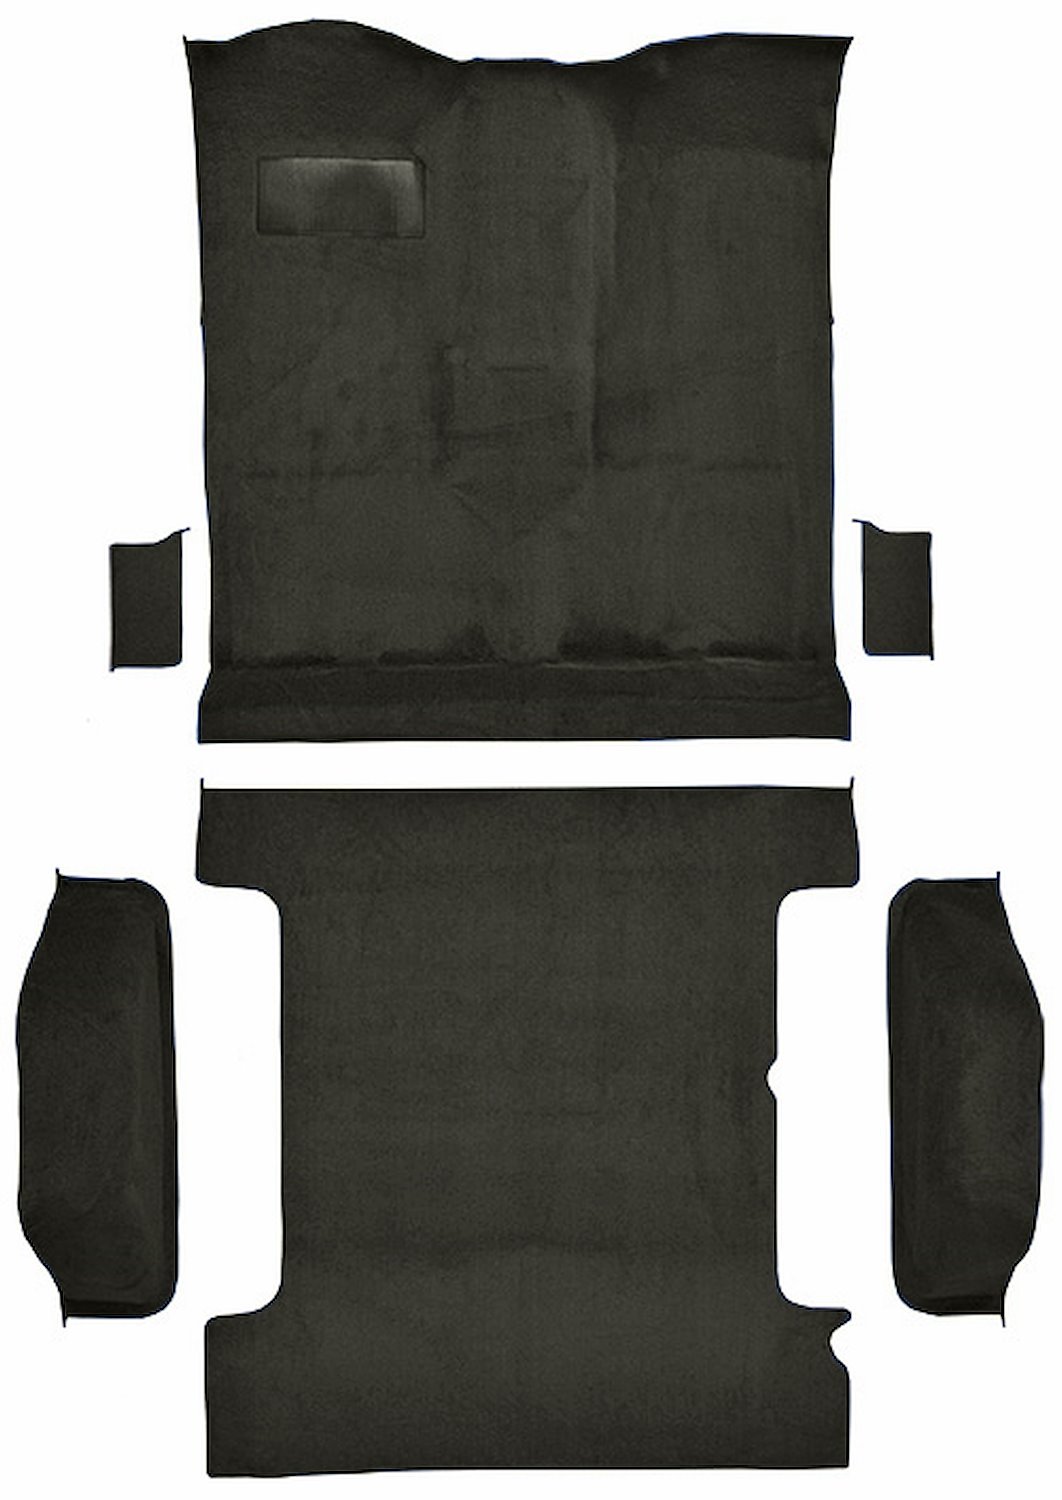 Molded Cut Pile Passenger and Cargo Area Carpet for 1978-1980 Chevrolet K5 Blazer, GMC Jimmy [Mass Backing, 6-Piece, Charcoal]